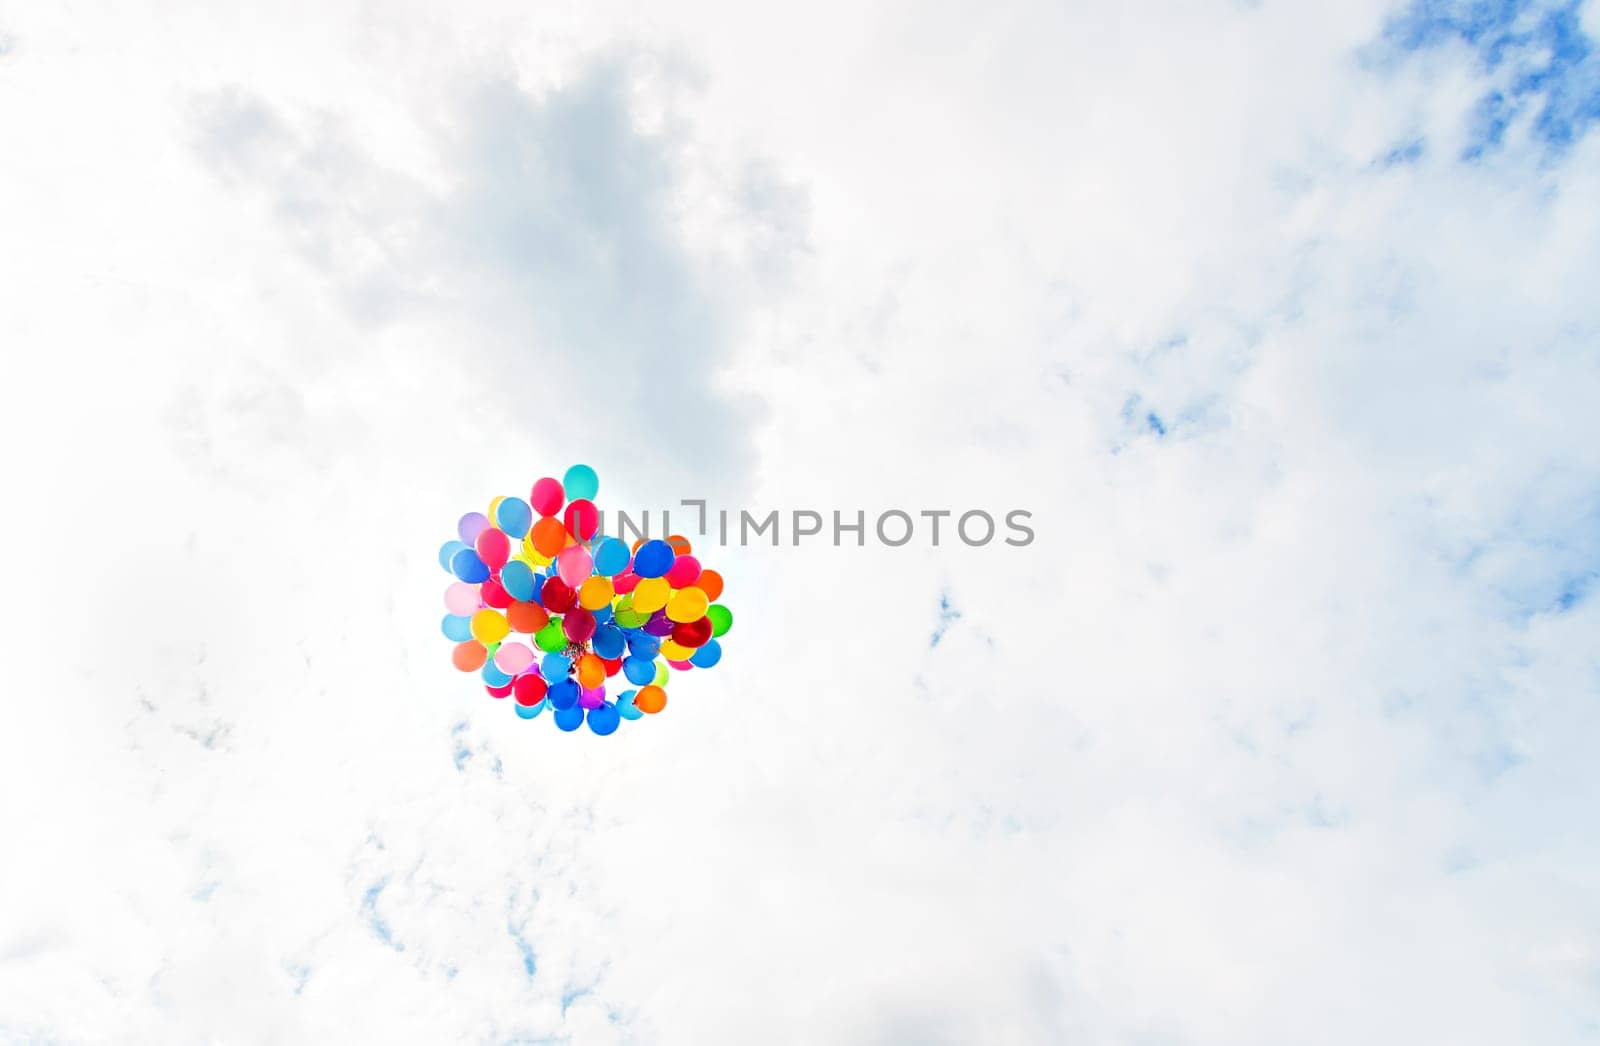 Summer Balloons Flying by Satura86